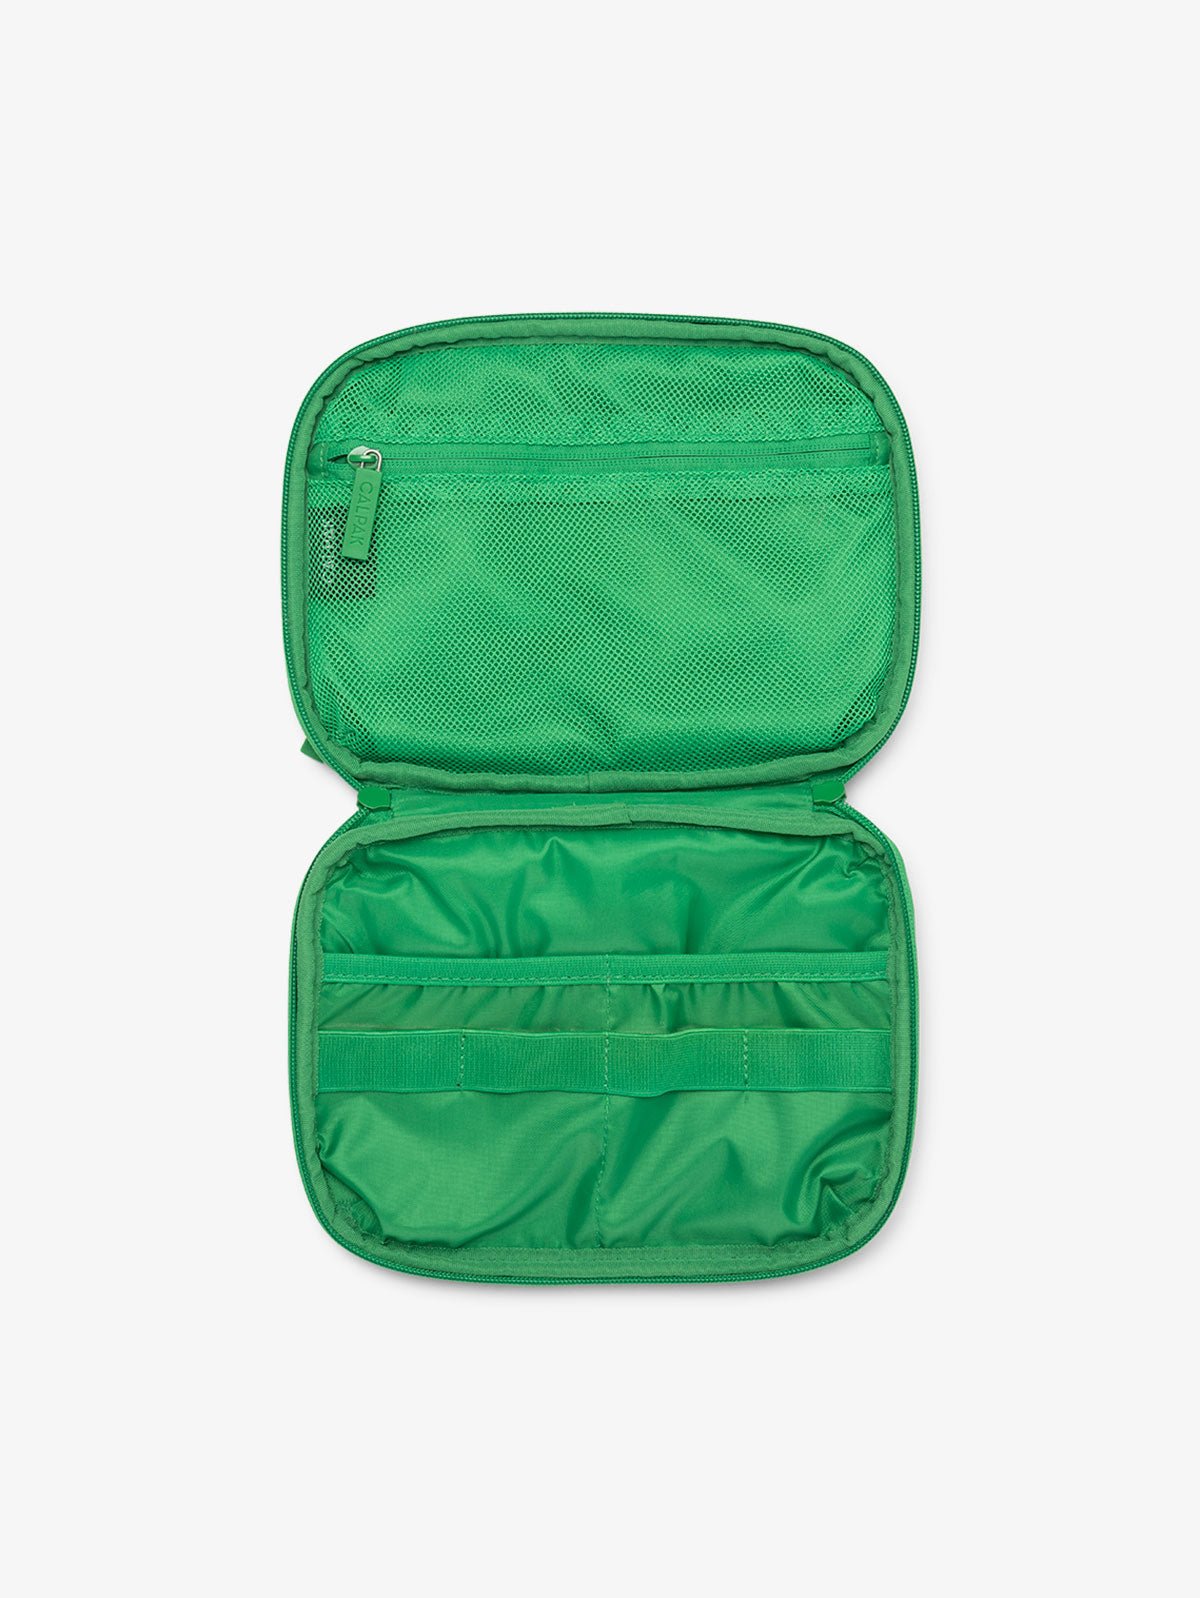 CALPAK tech and electronics organizer for travel in green checkerboard